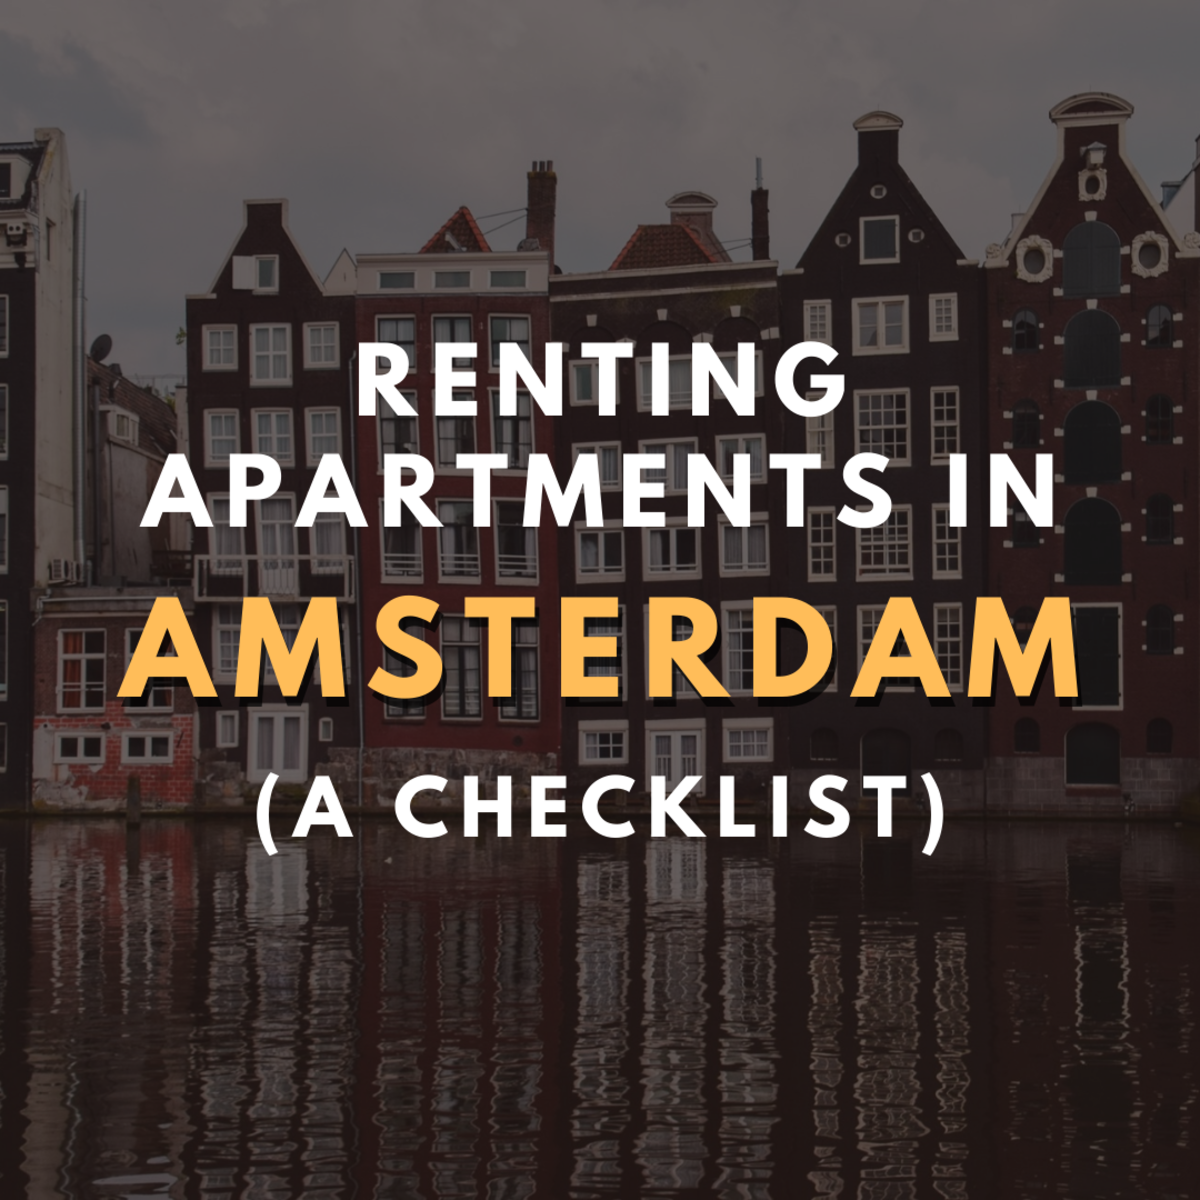 Renting An Apartment in Amsterdam as an Expat: What You Need to Consider